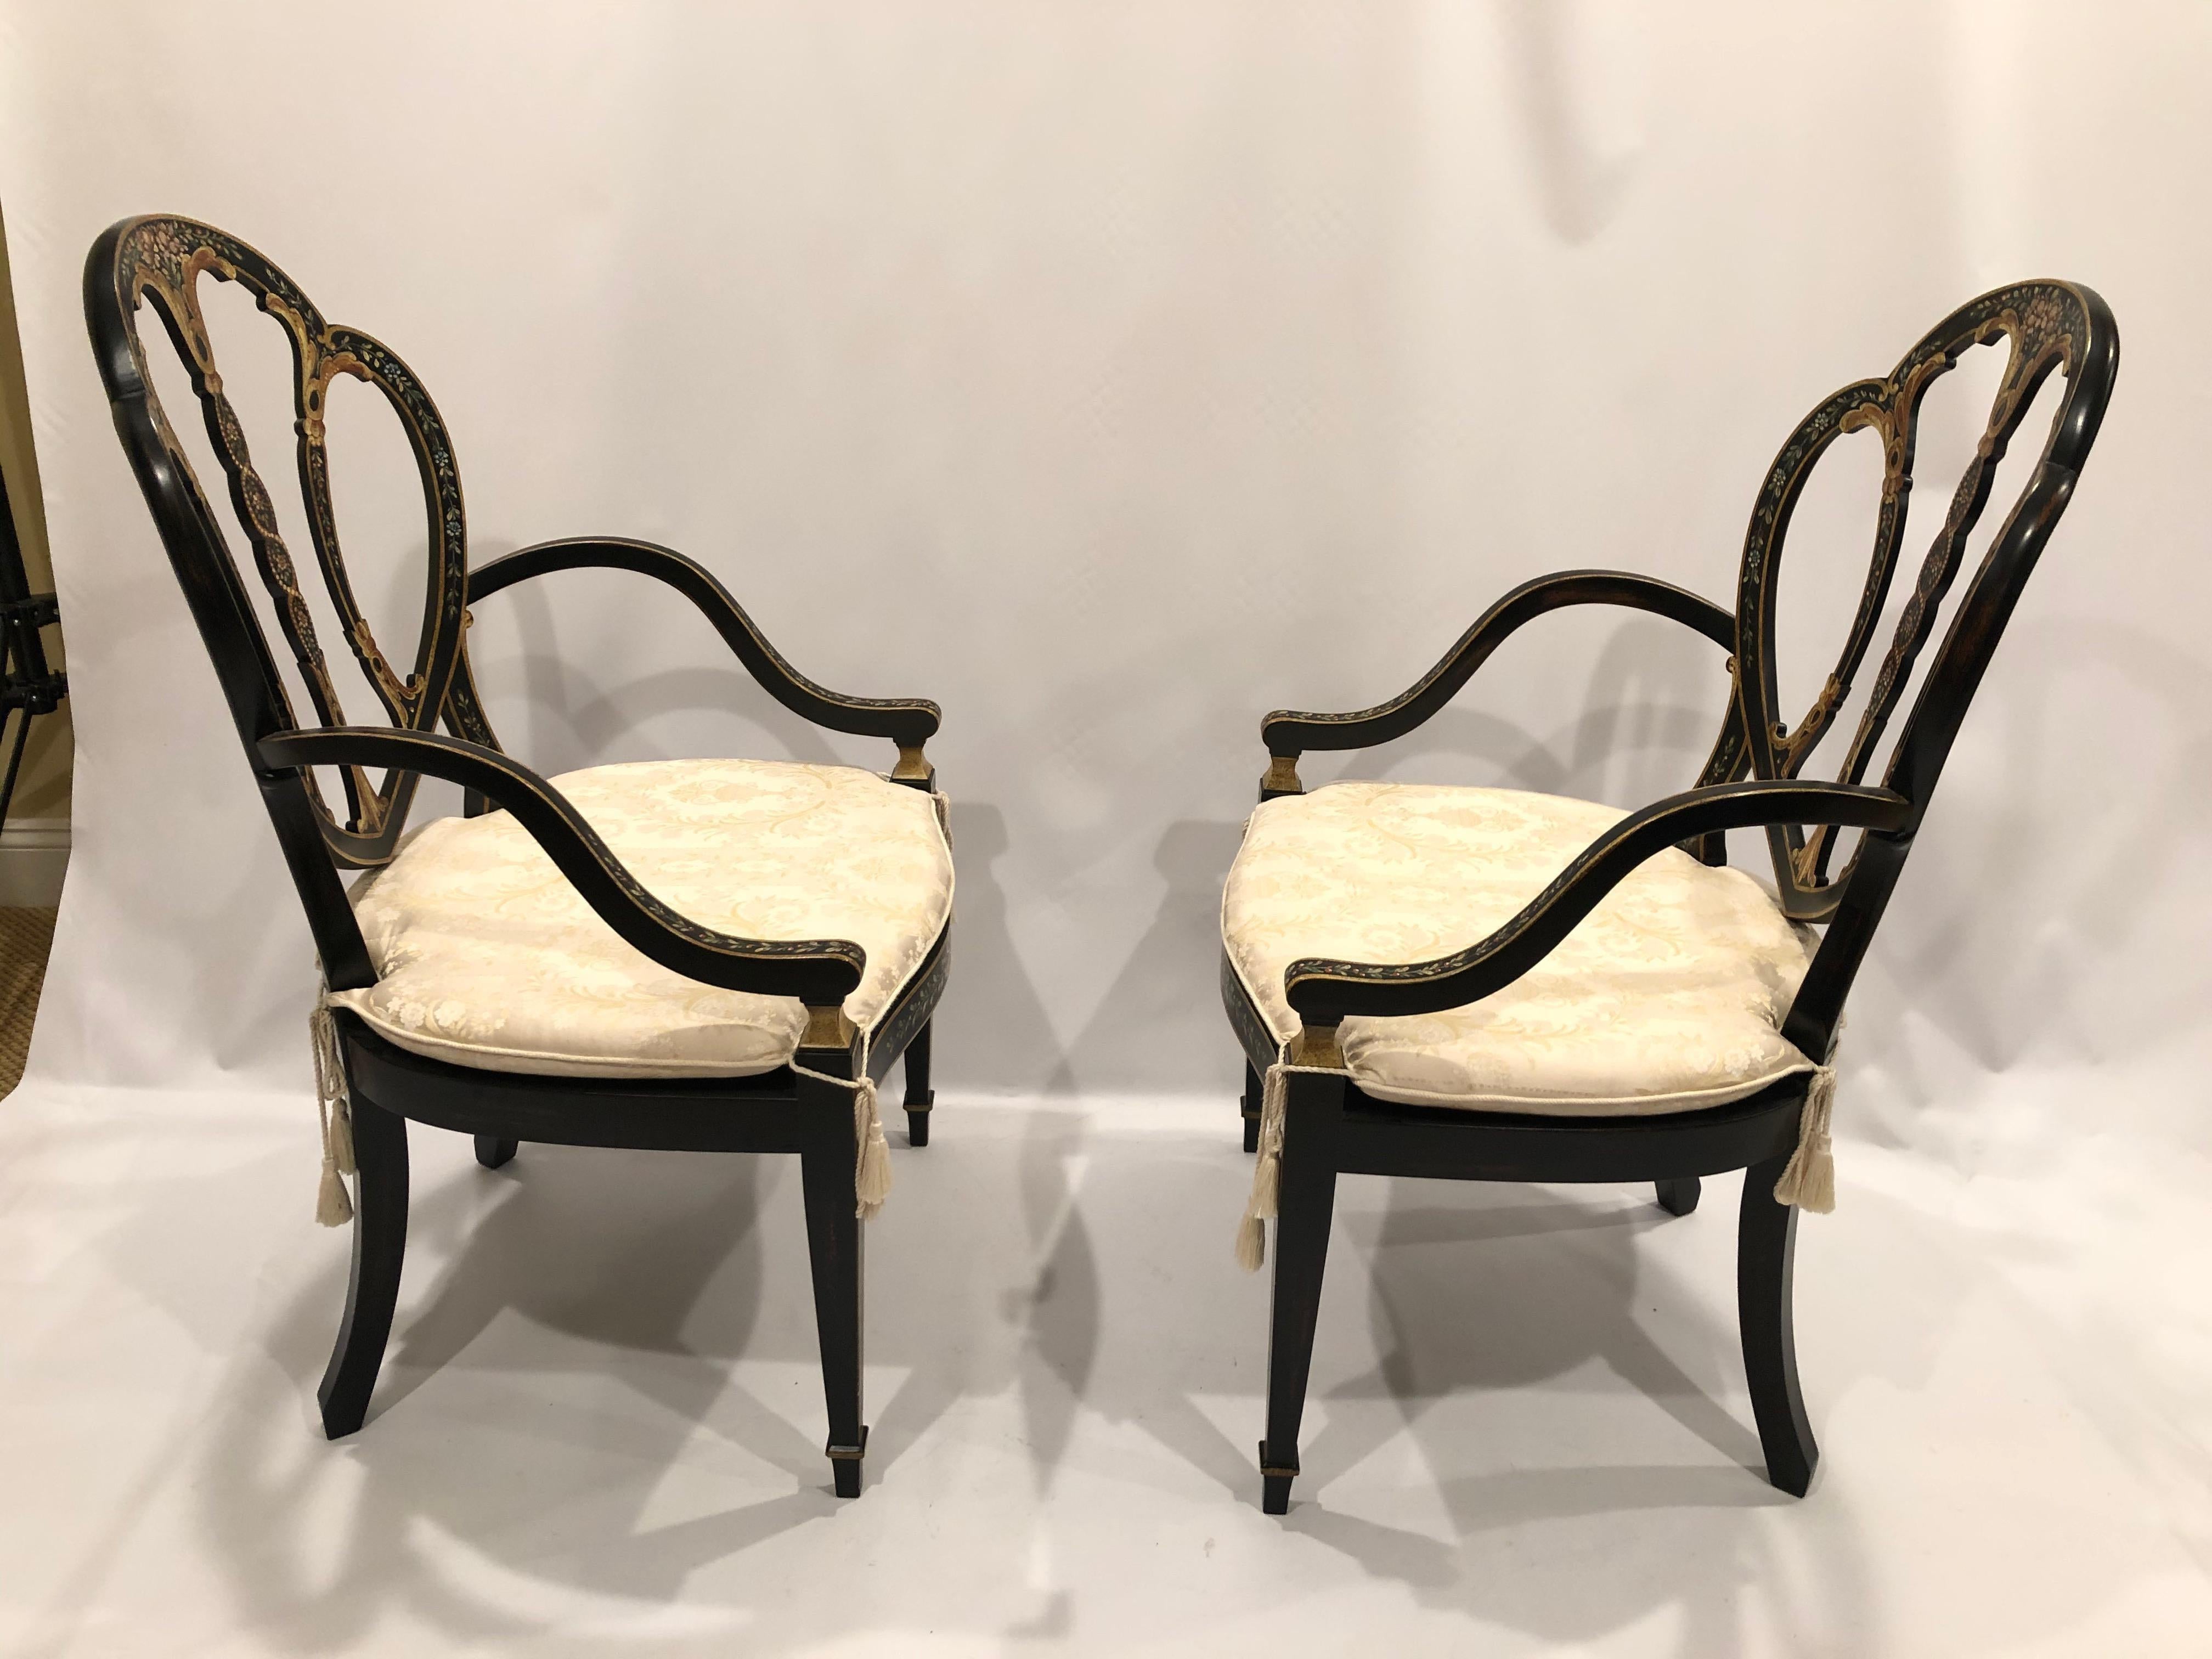 Magnificent Pair of Black Hand Painted Italian Armchairs with Caned Seats For Sale 7